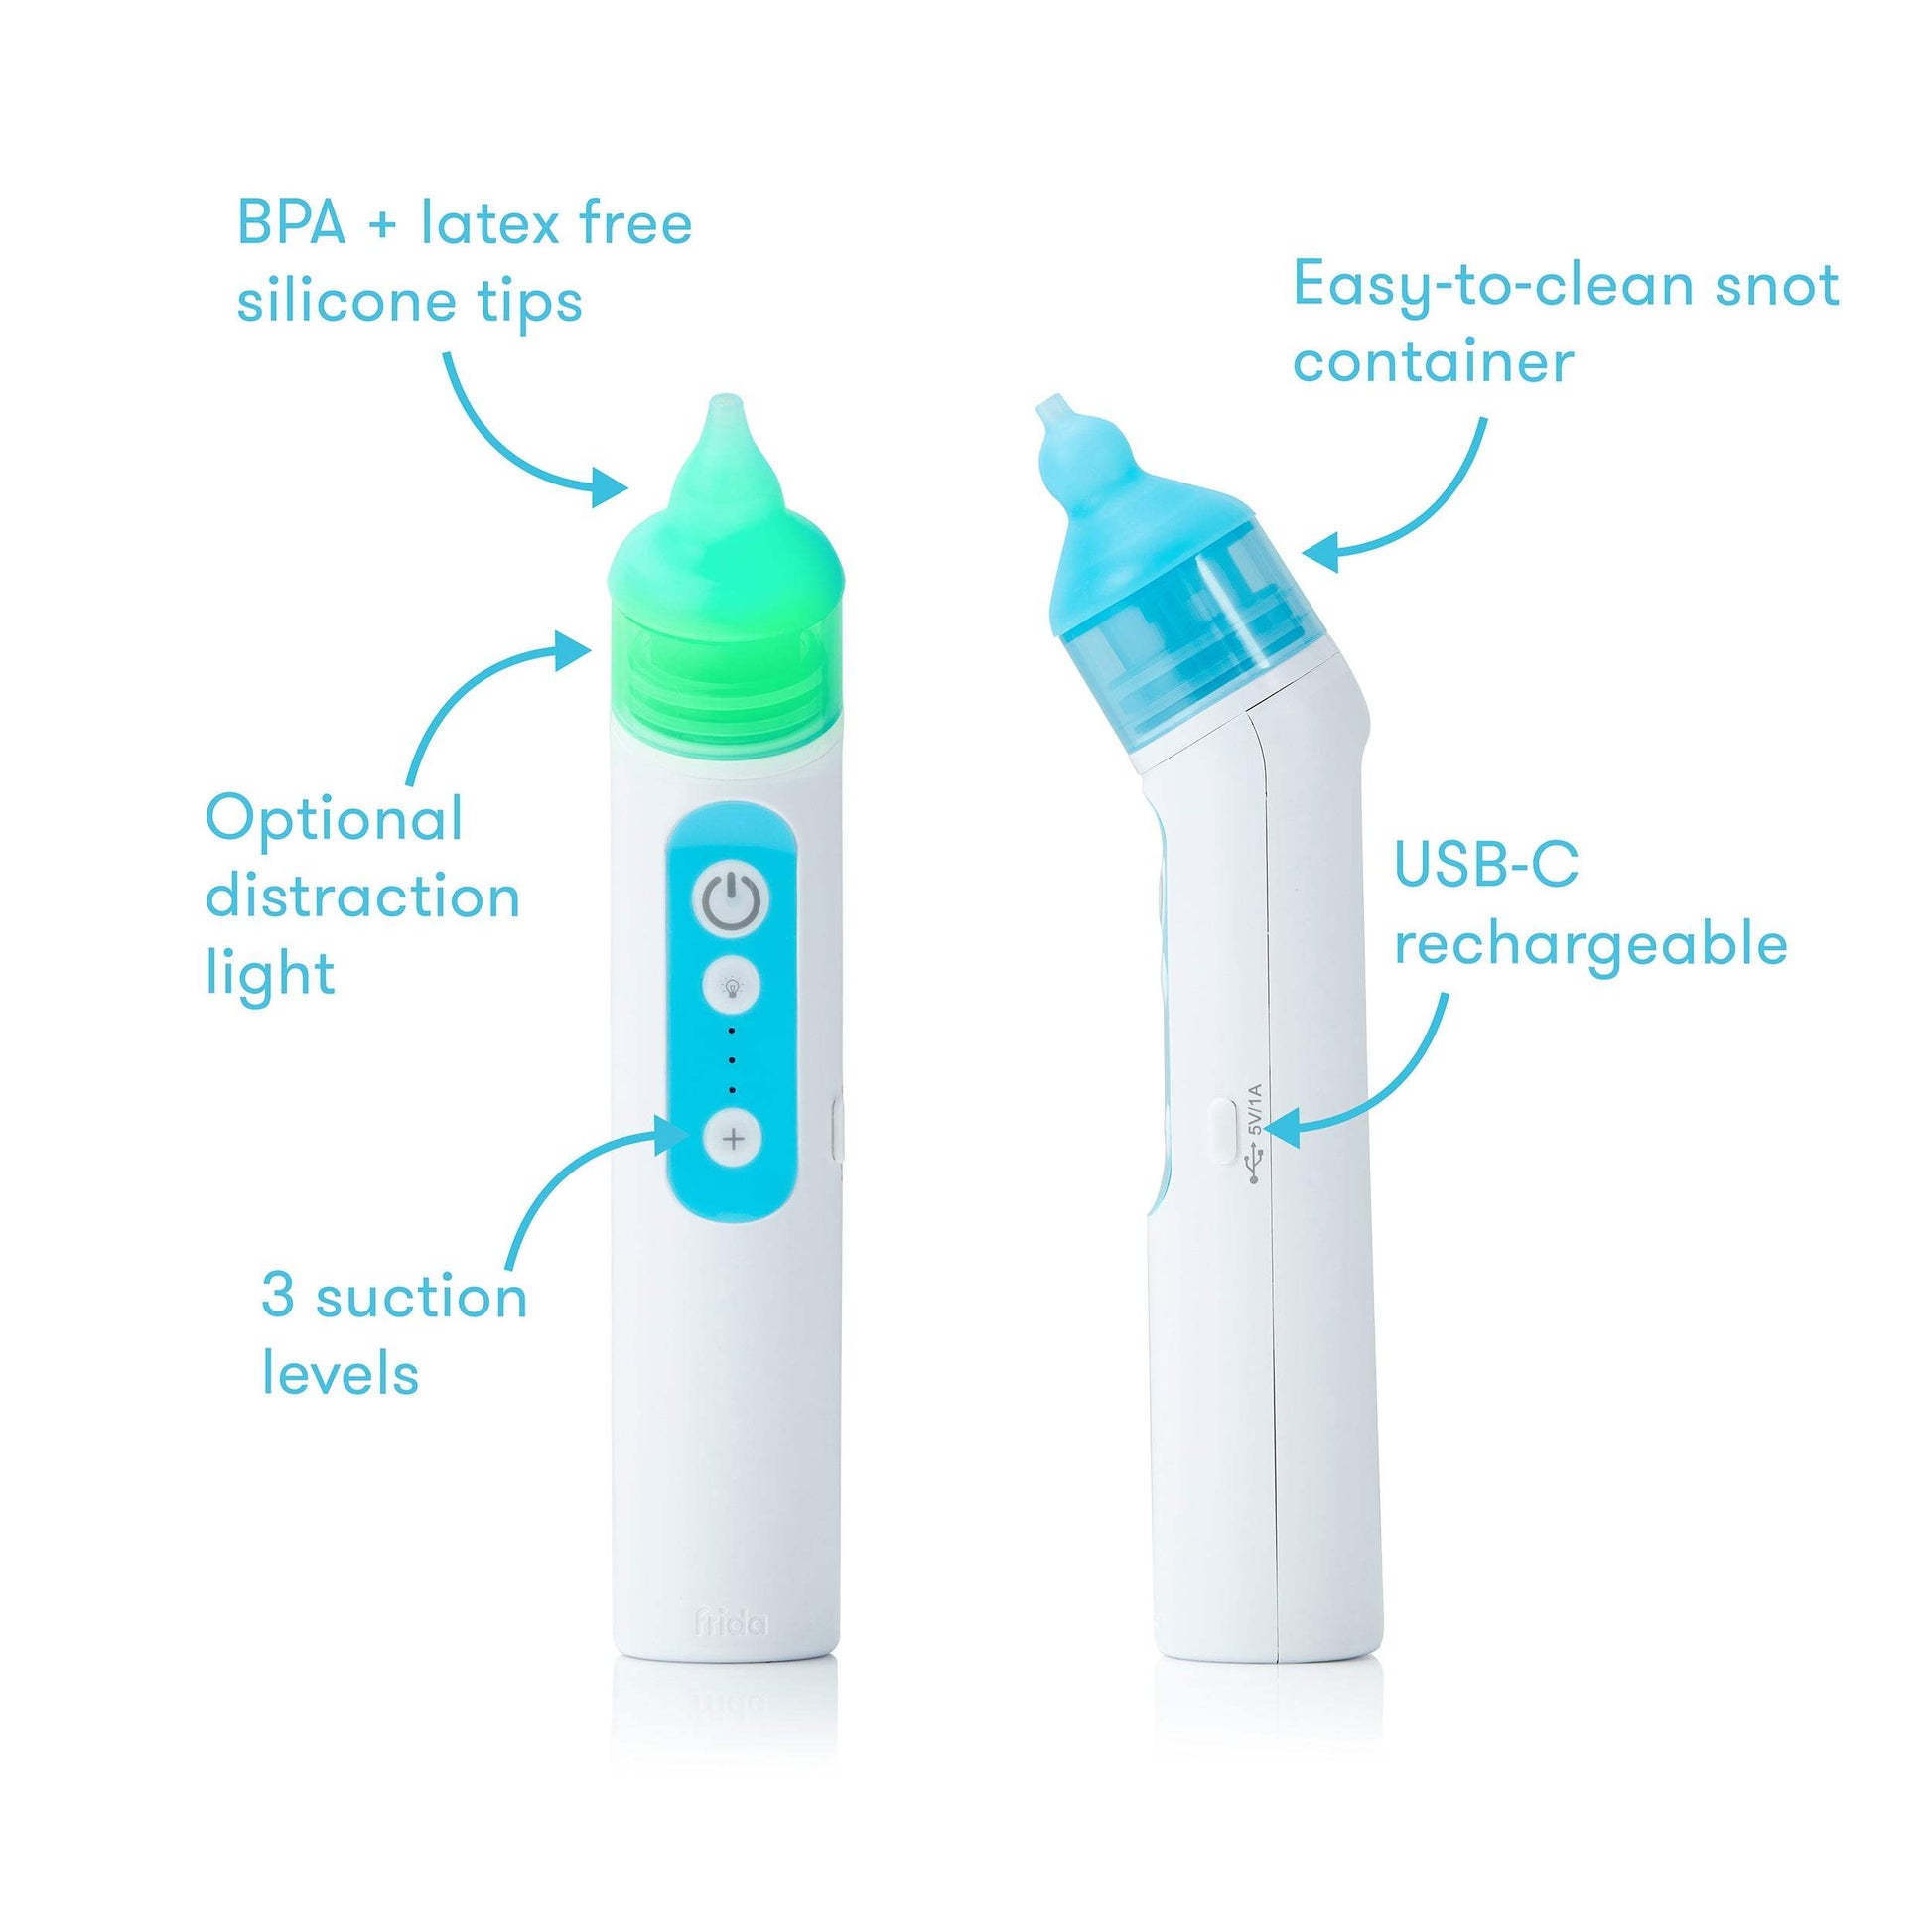 An infographic showing features on the front and side of the device. The features on the device include: 2 BPA plus latex free silicone tips, an optional distraction light, 3 suction levels, easy to clean snot container, and a USB-C rechargable port.